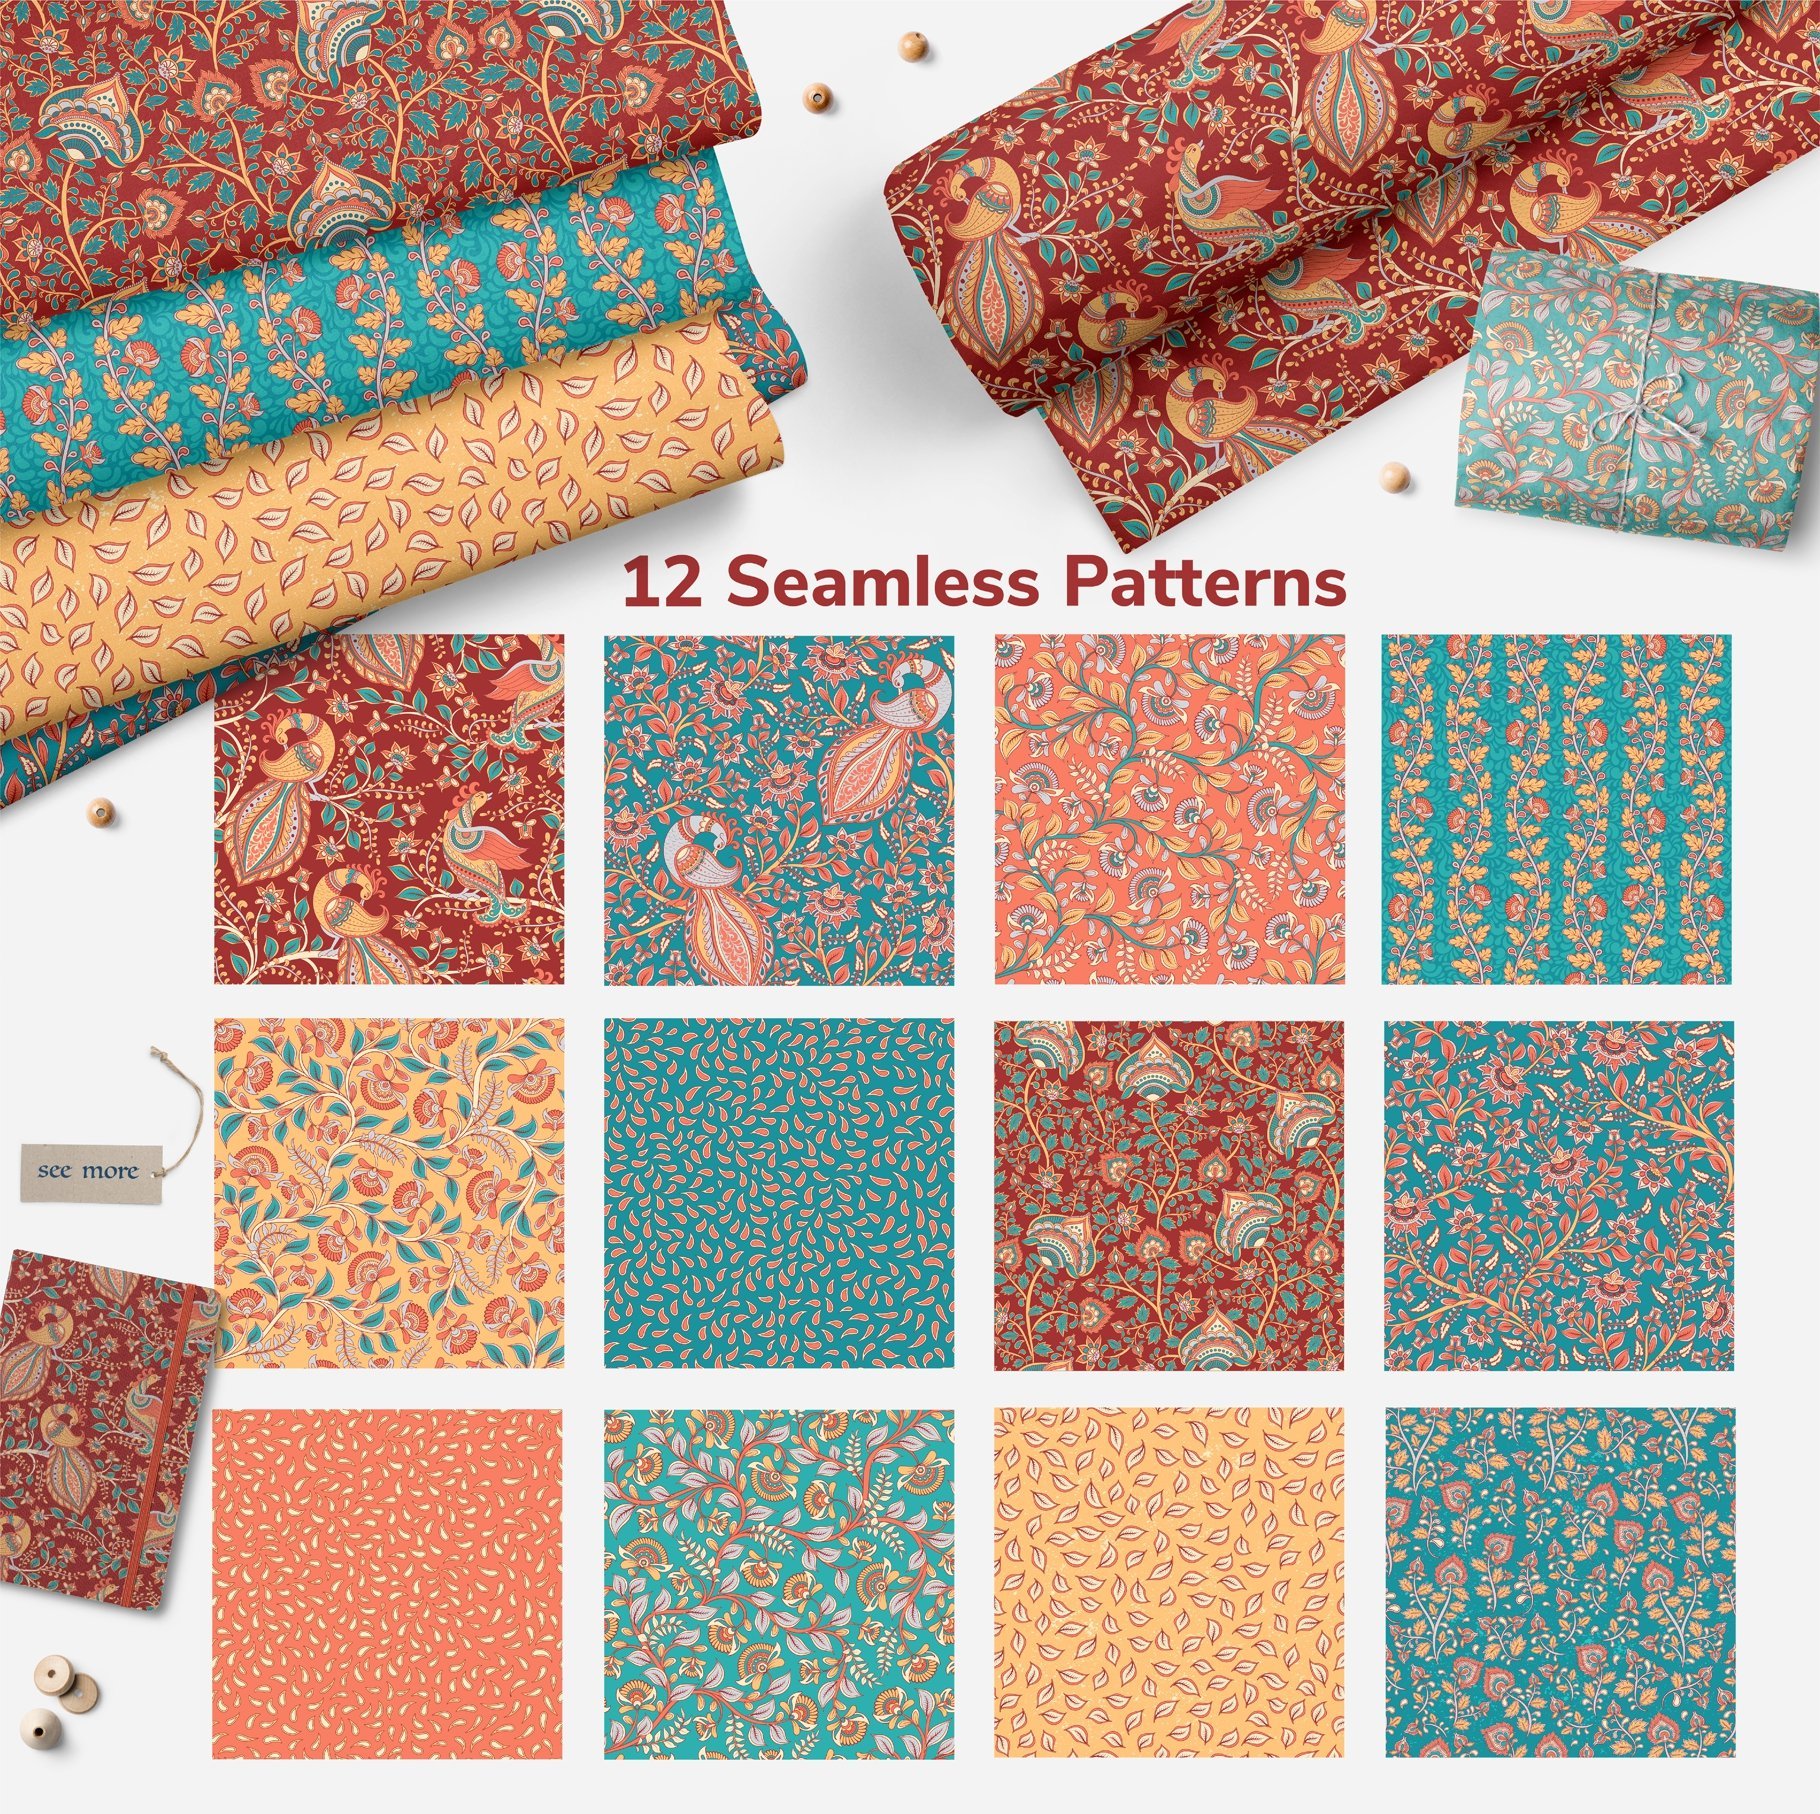 The Dynamic Textures and Patterns Collection